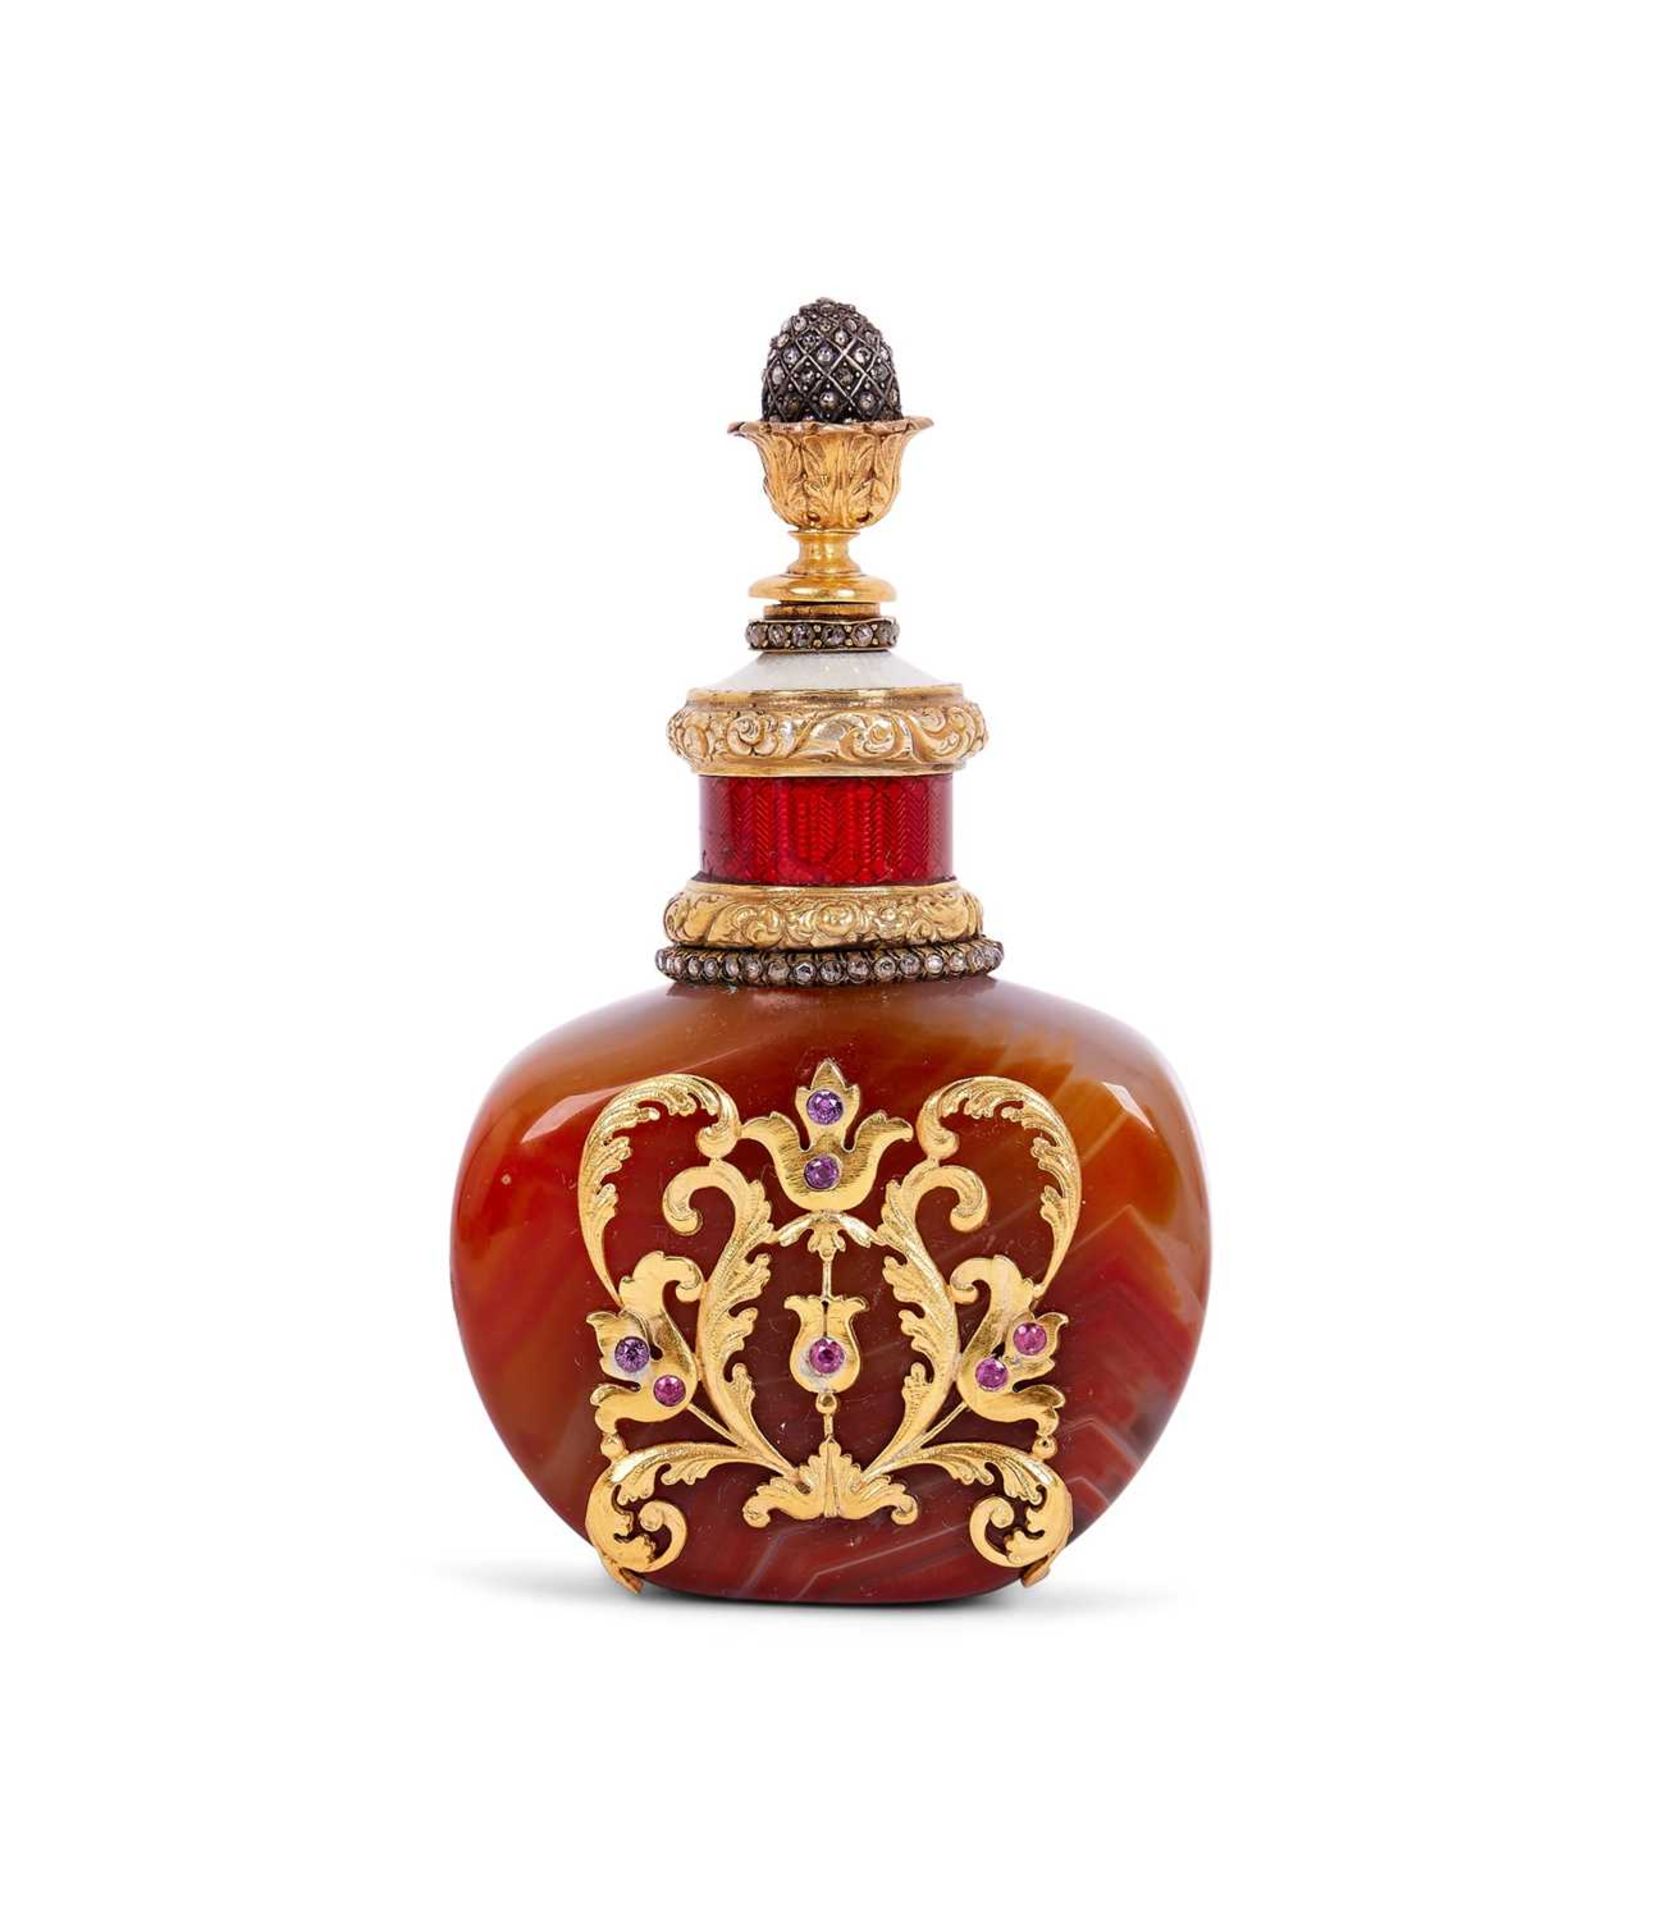 A FABERGE STYLE SILVER GILT, DIAMOND AND ENAMEL MOUNTED AGATE PERFUME BOTTLE - Image 2 of 14